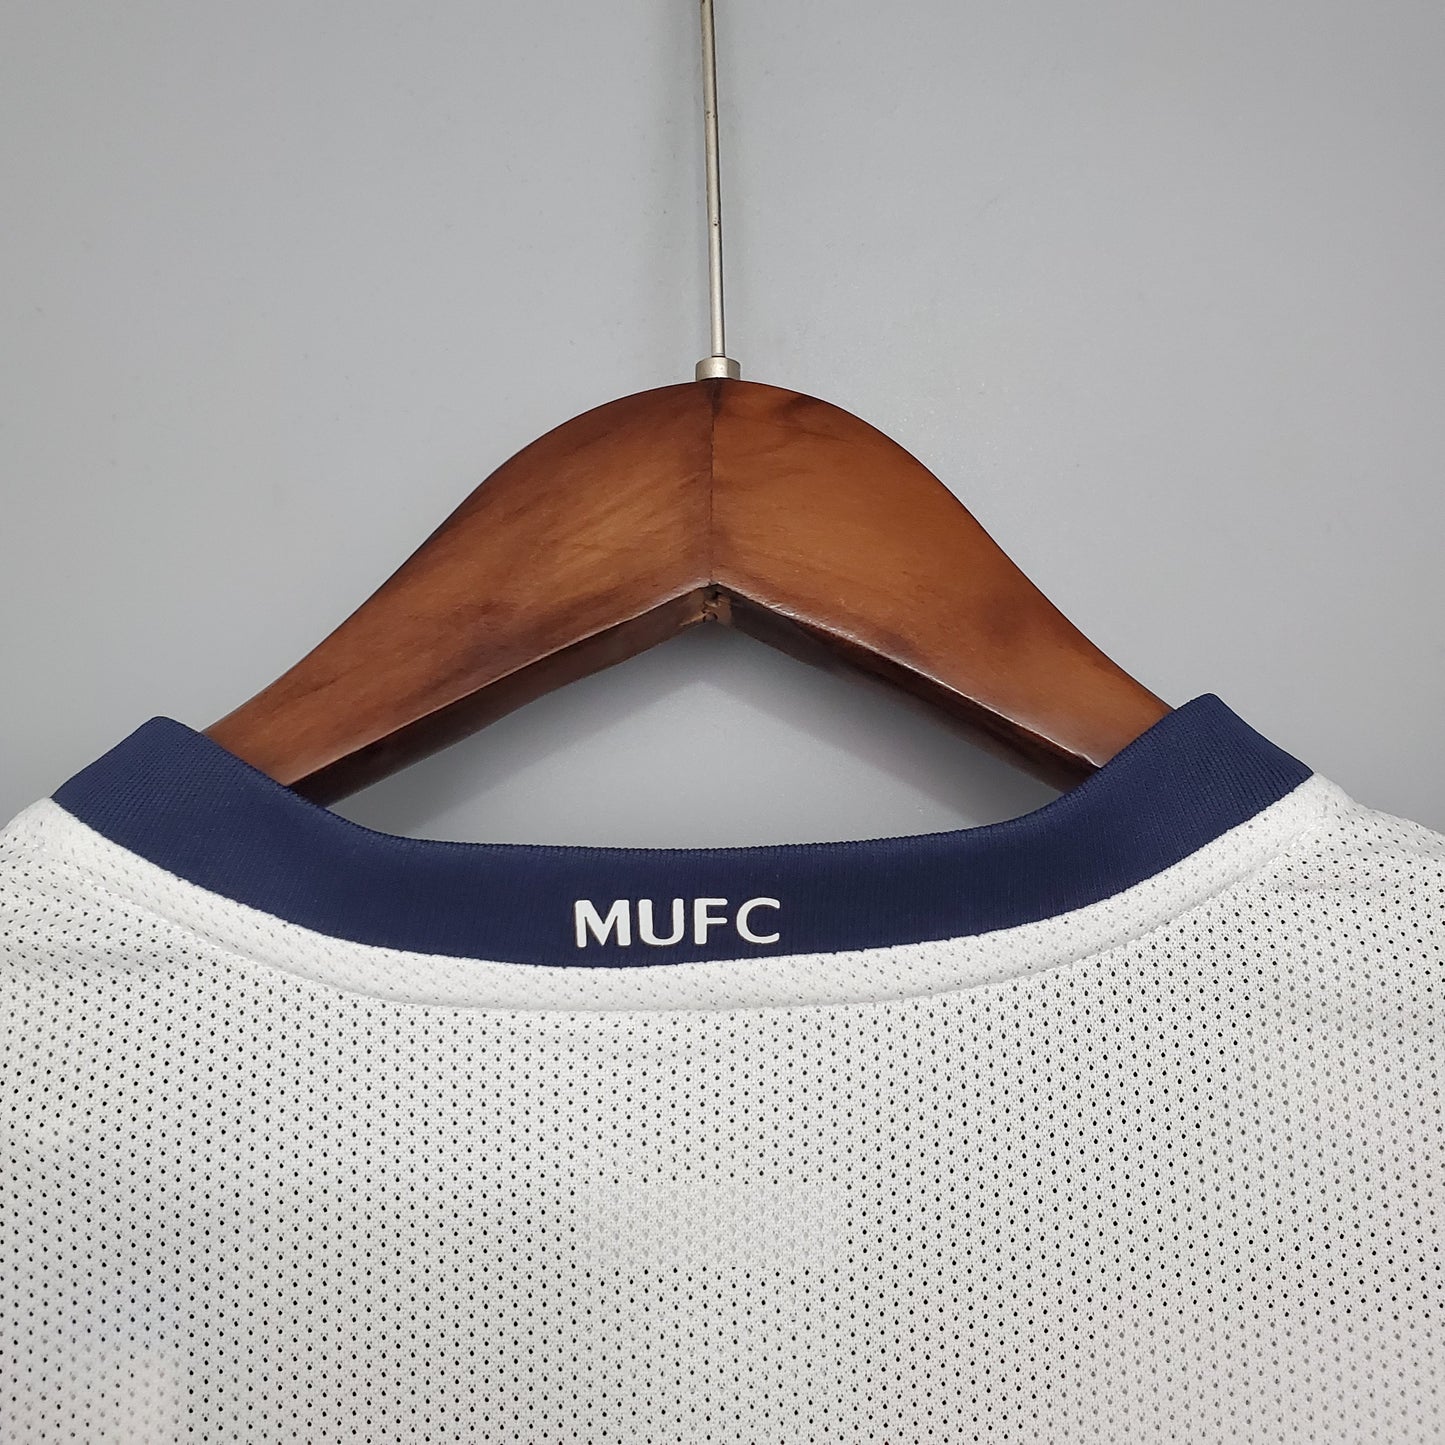 Manchester United 2008/09 Away Jersey